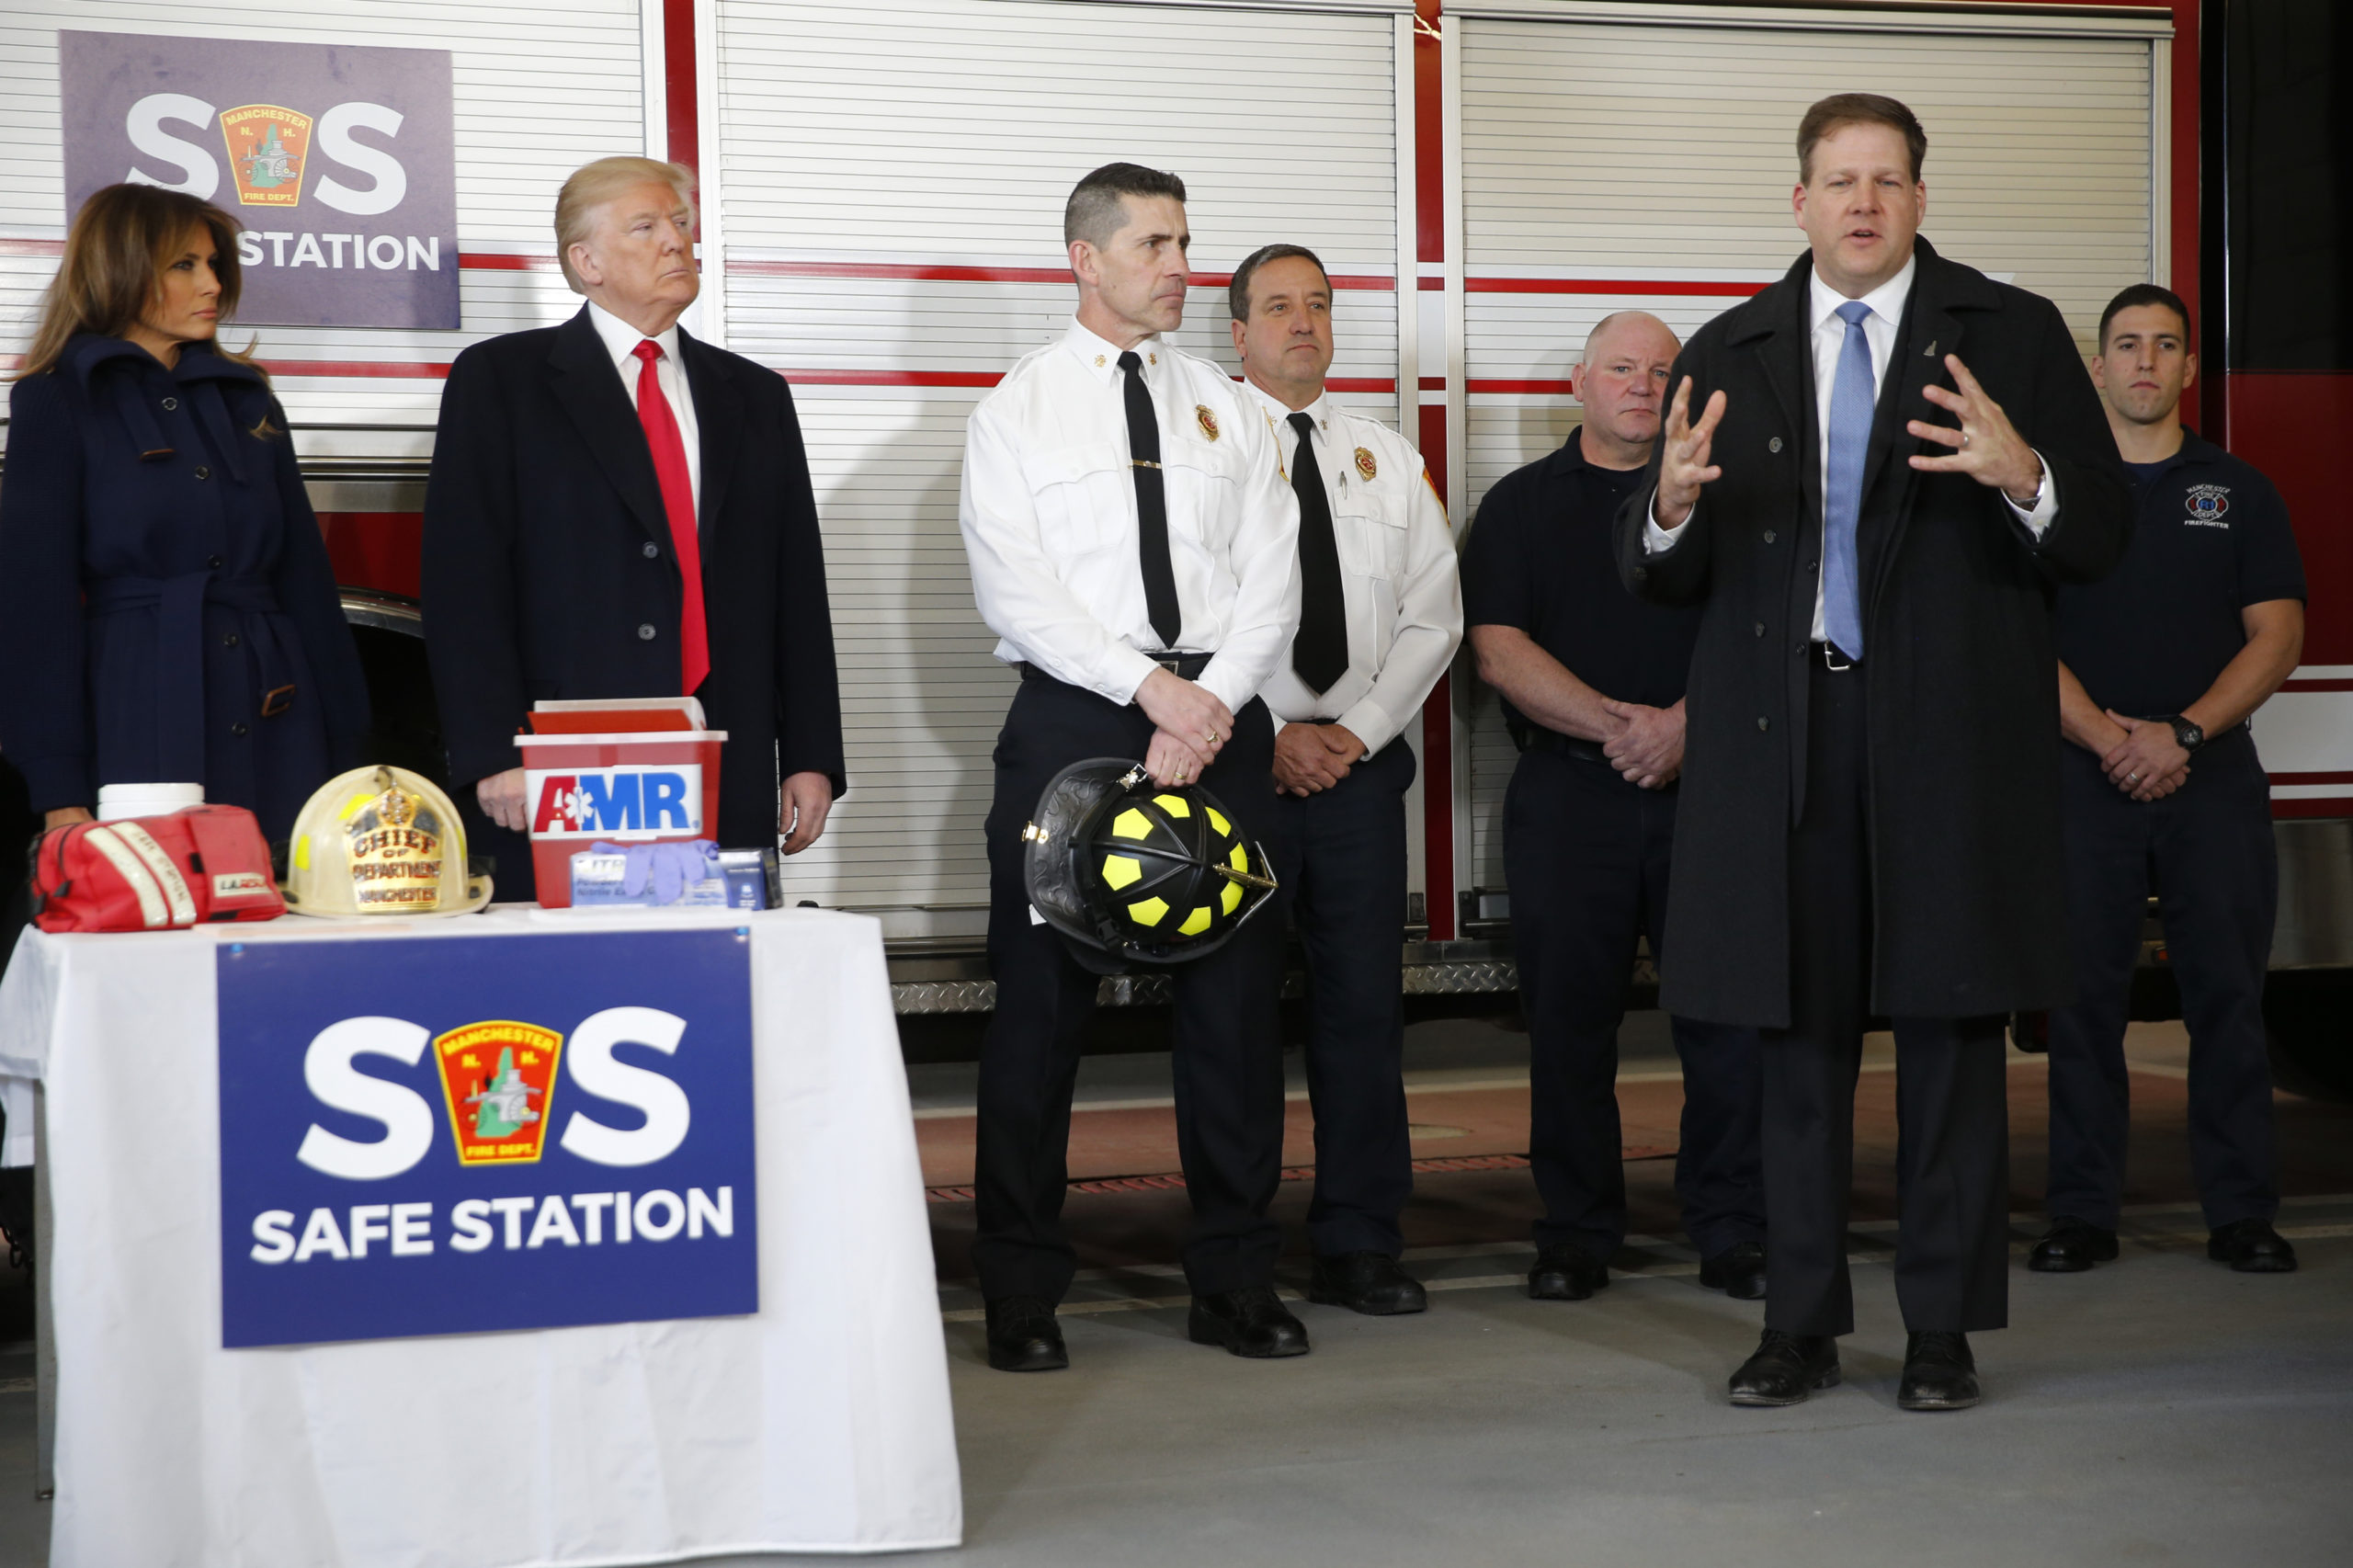 U.S. President Donald Trump listens to New Hampshire Governor Chris Sununu (R) as the president and first lady Melania Trump visit first responders who administer a drug treatment intake program at their fire station in Manchester, New Hampshire, U.S. March 19, 2018. REUTERS/Jonathan Ernst